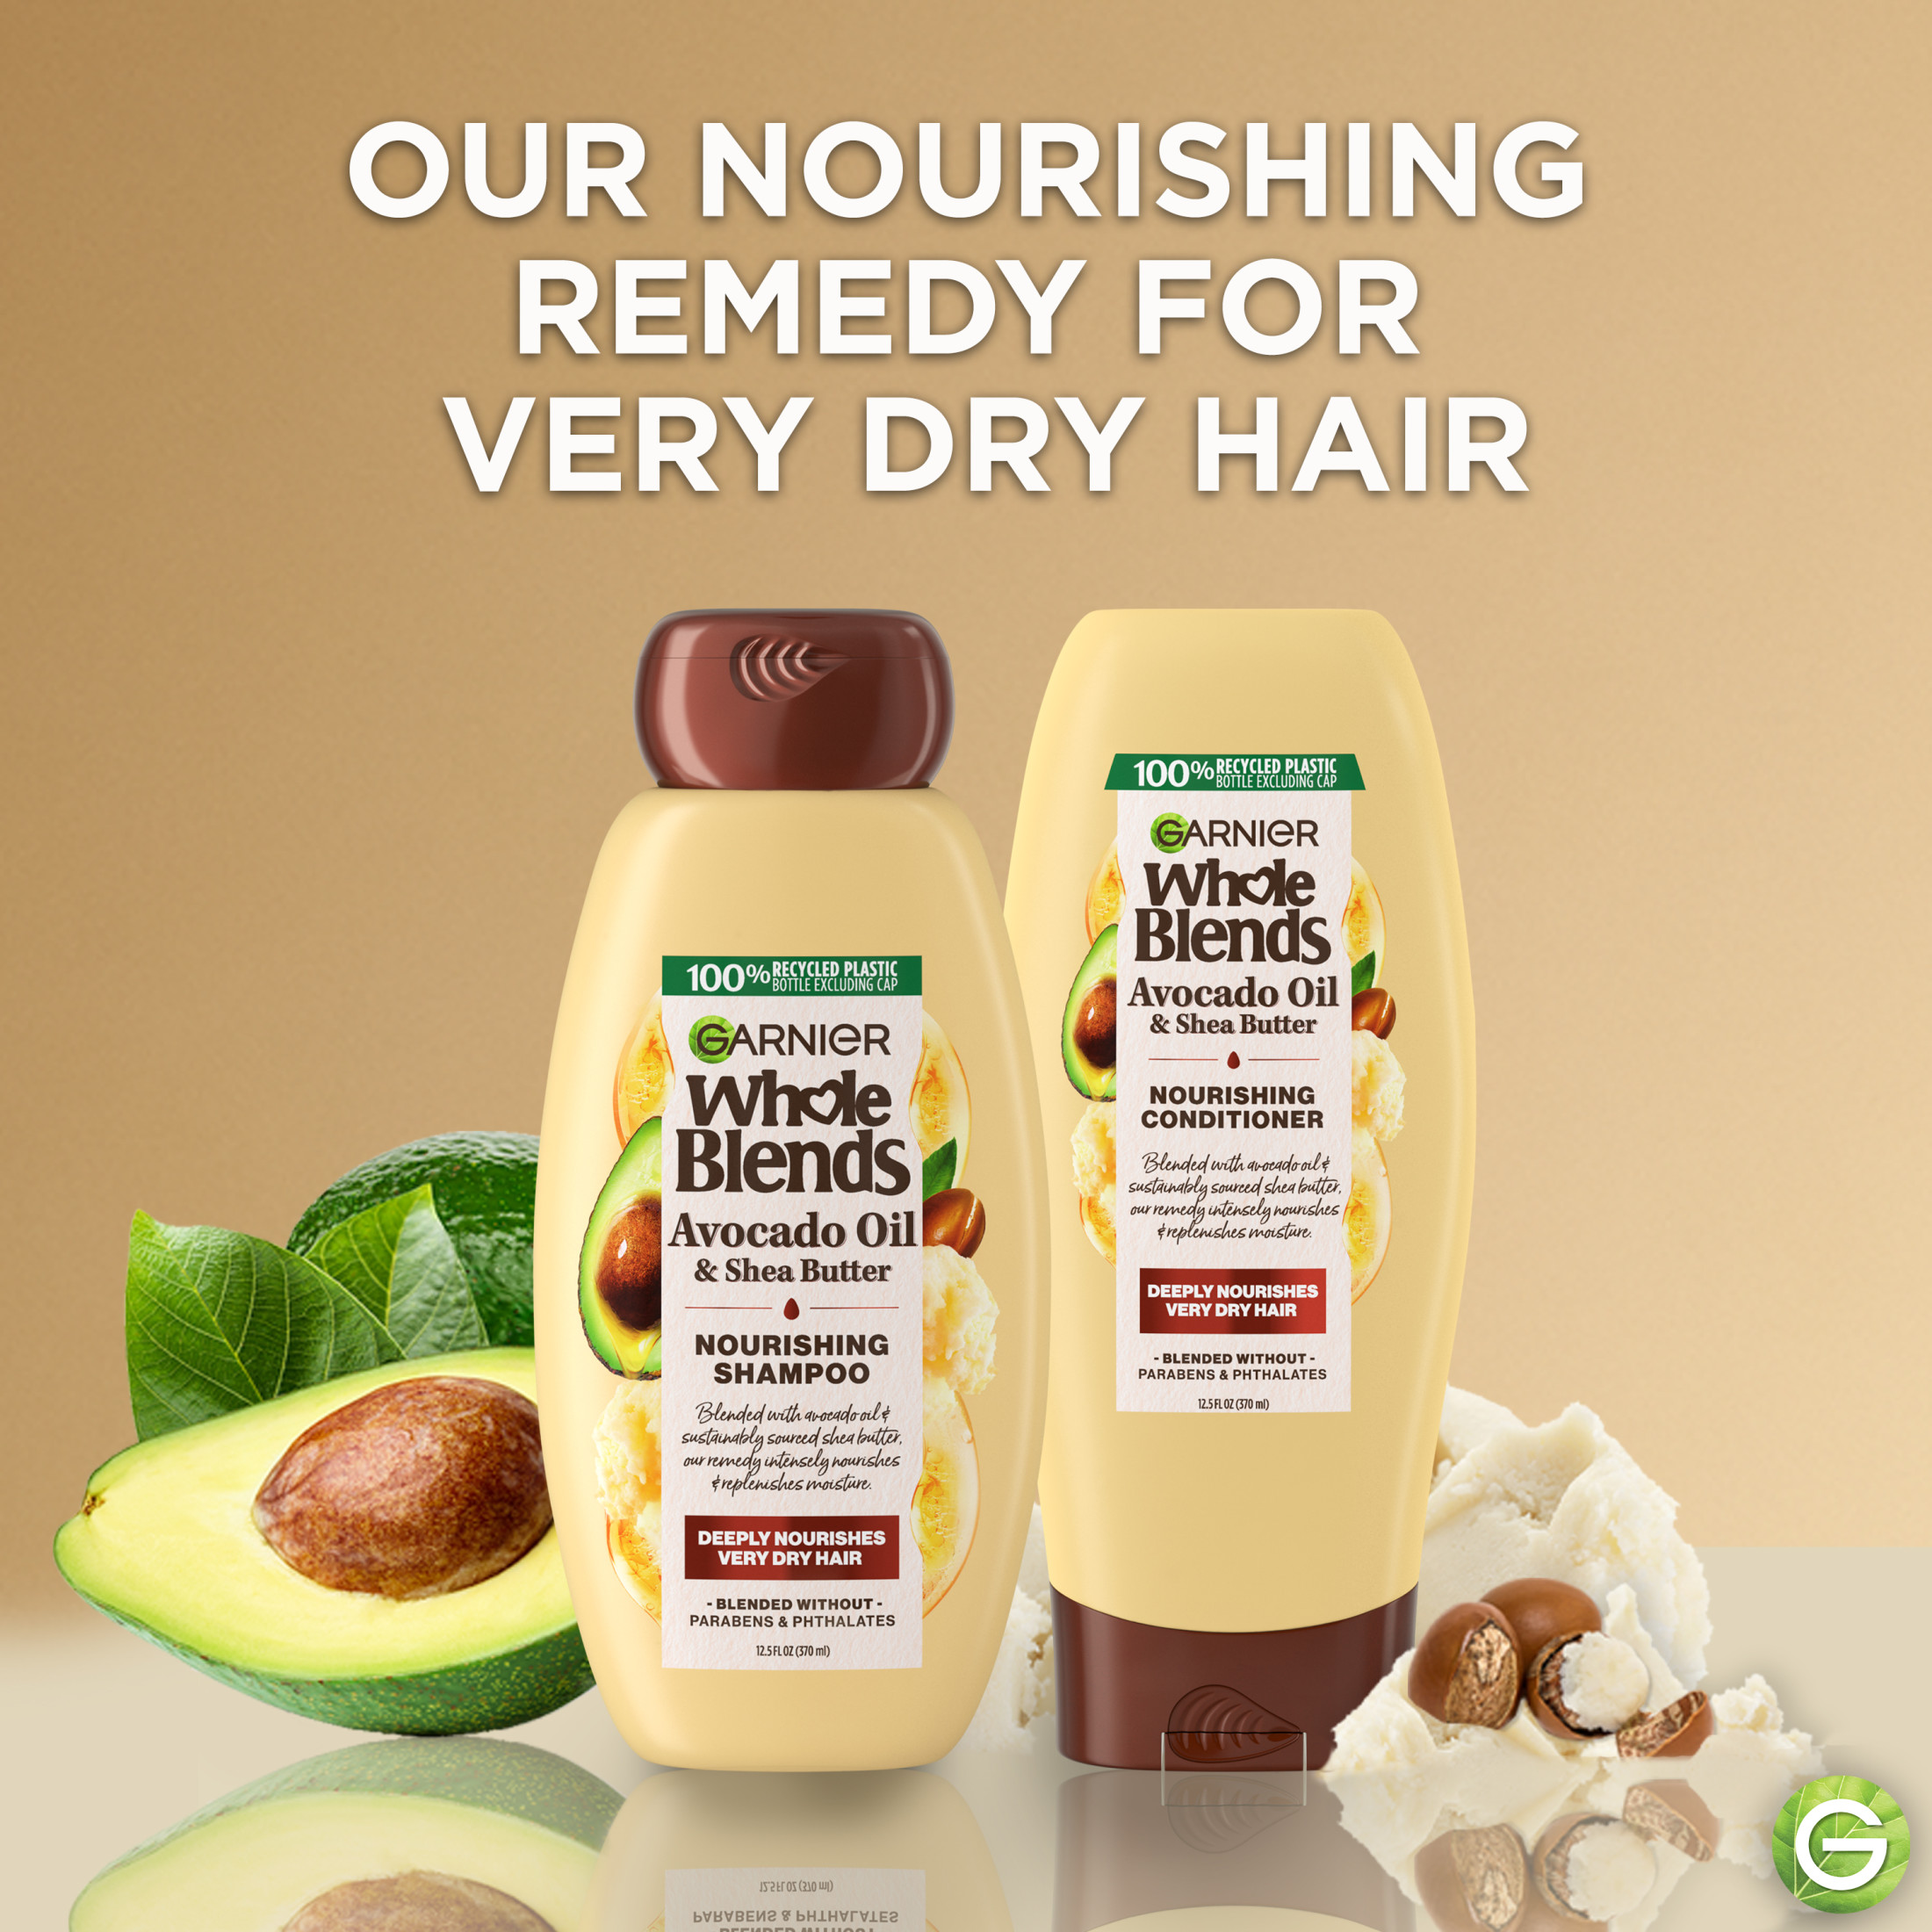 Garnier Whole Blends Nourishing Shampoo with Avocado Oil and Shea Butter, 12.5 fl oz - image 4 of 8